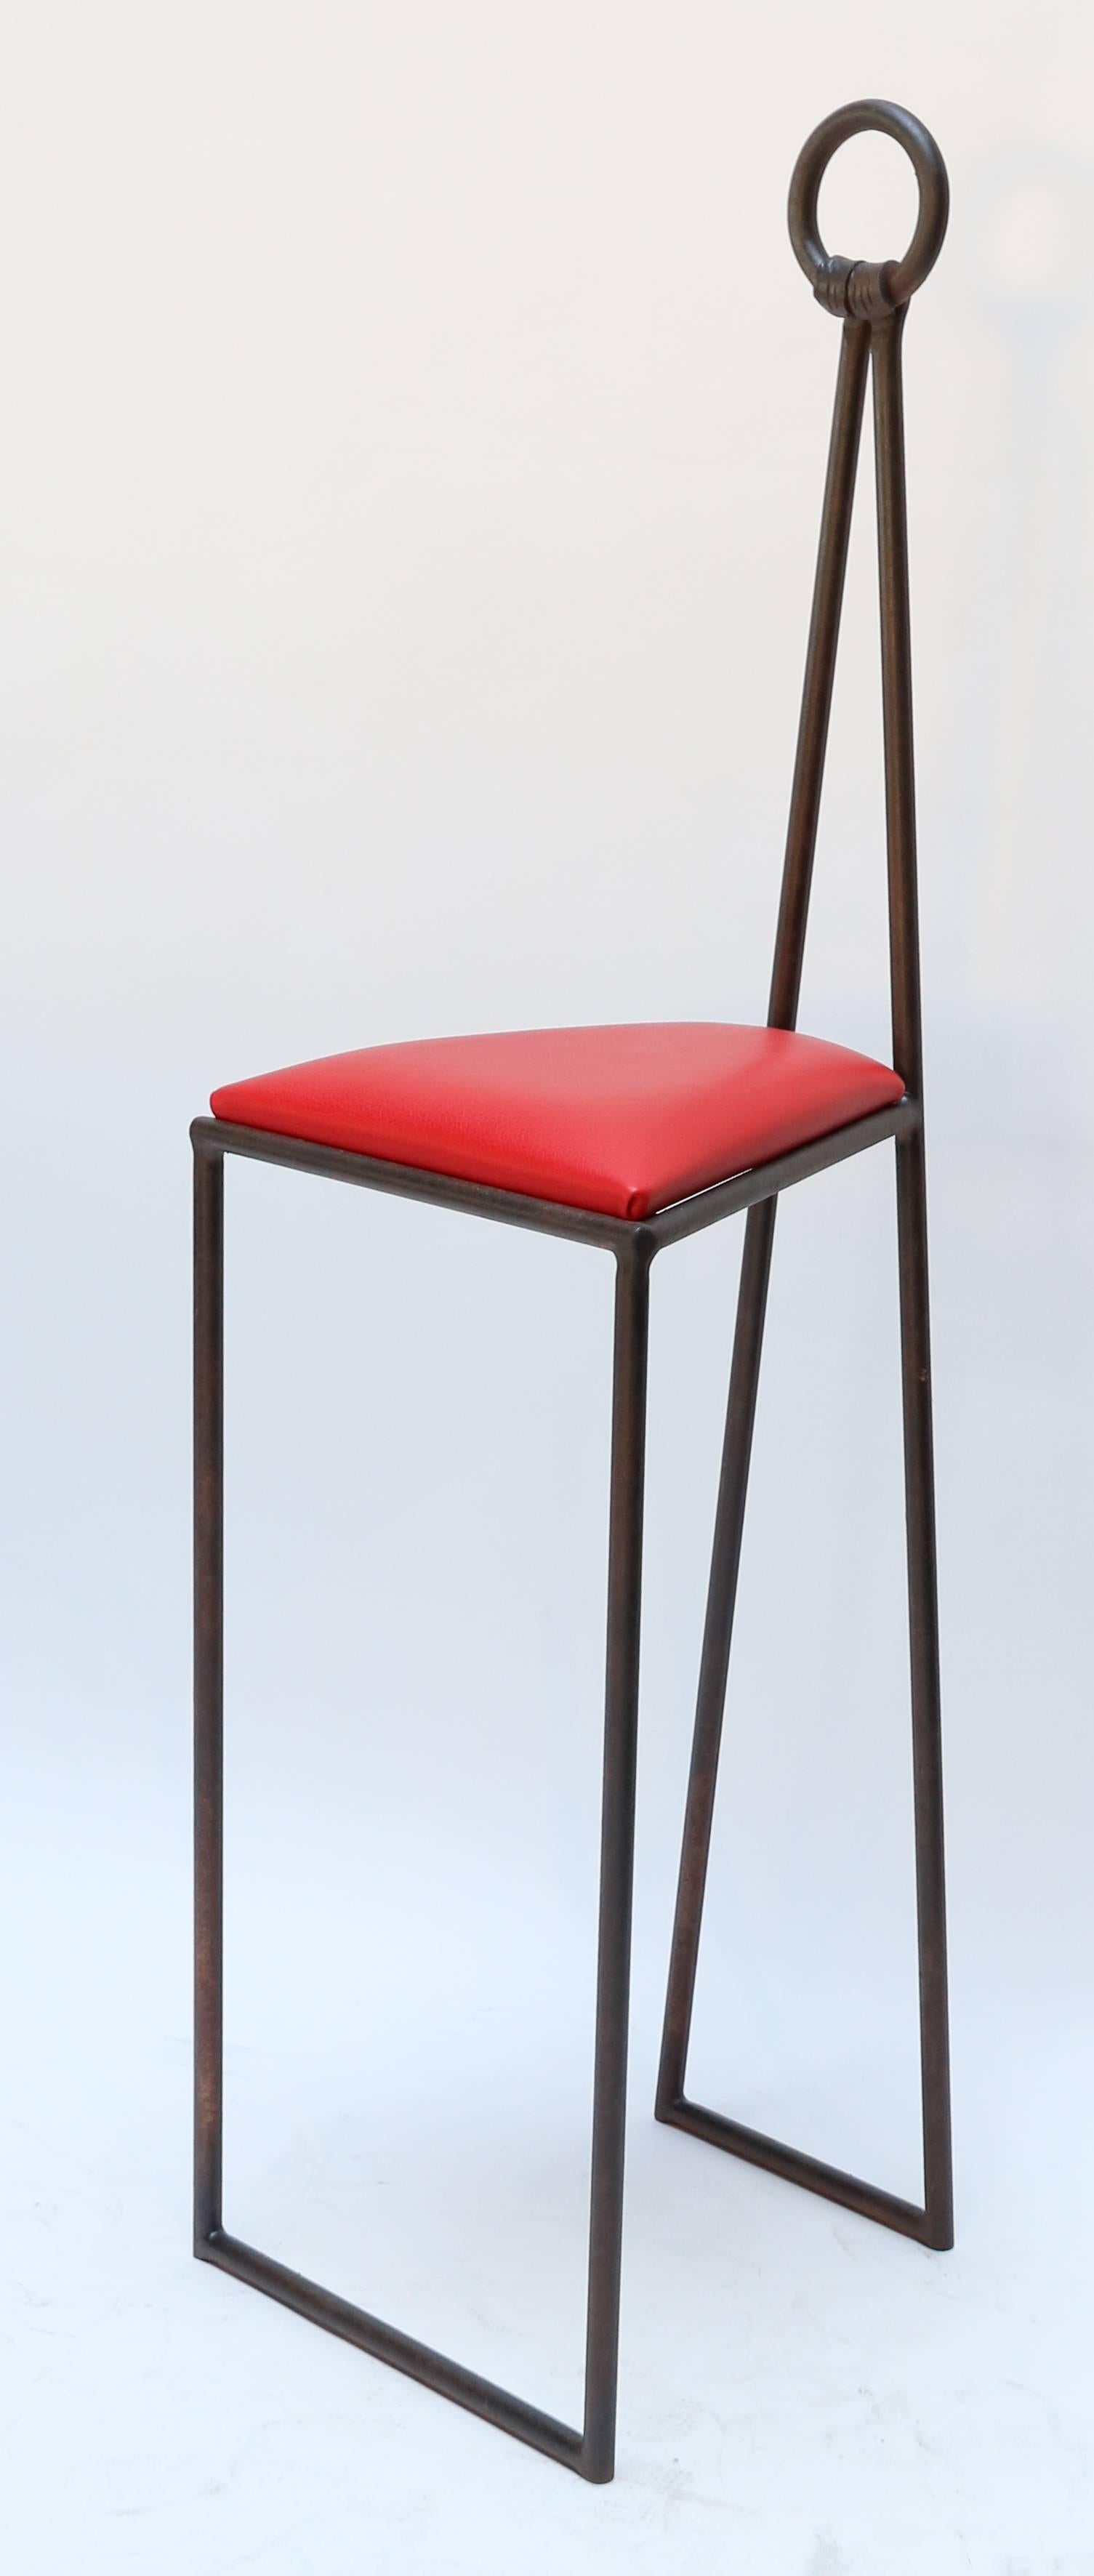 Custom iron bar stools with red leather seats.  Made in Los Angeles by Adesso Imports. Bar height and counter height available. Price and pictures shown are counter height.

Measures: Smaller counter height 45.25